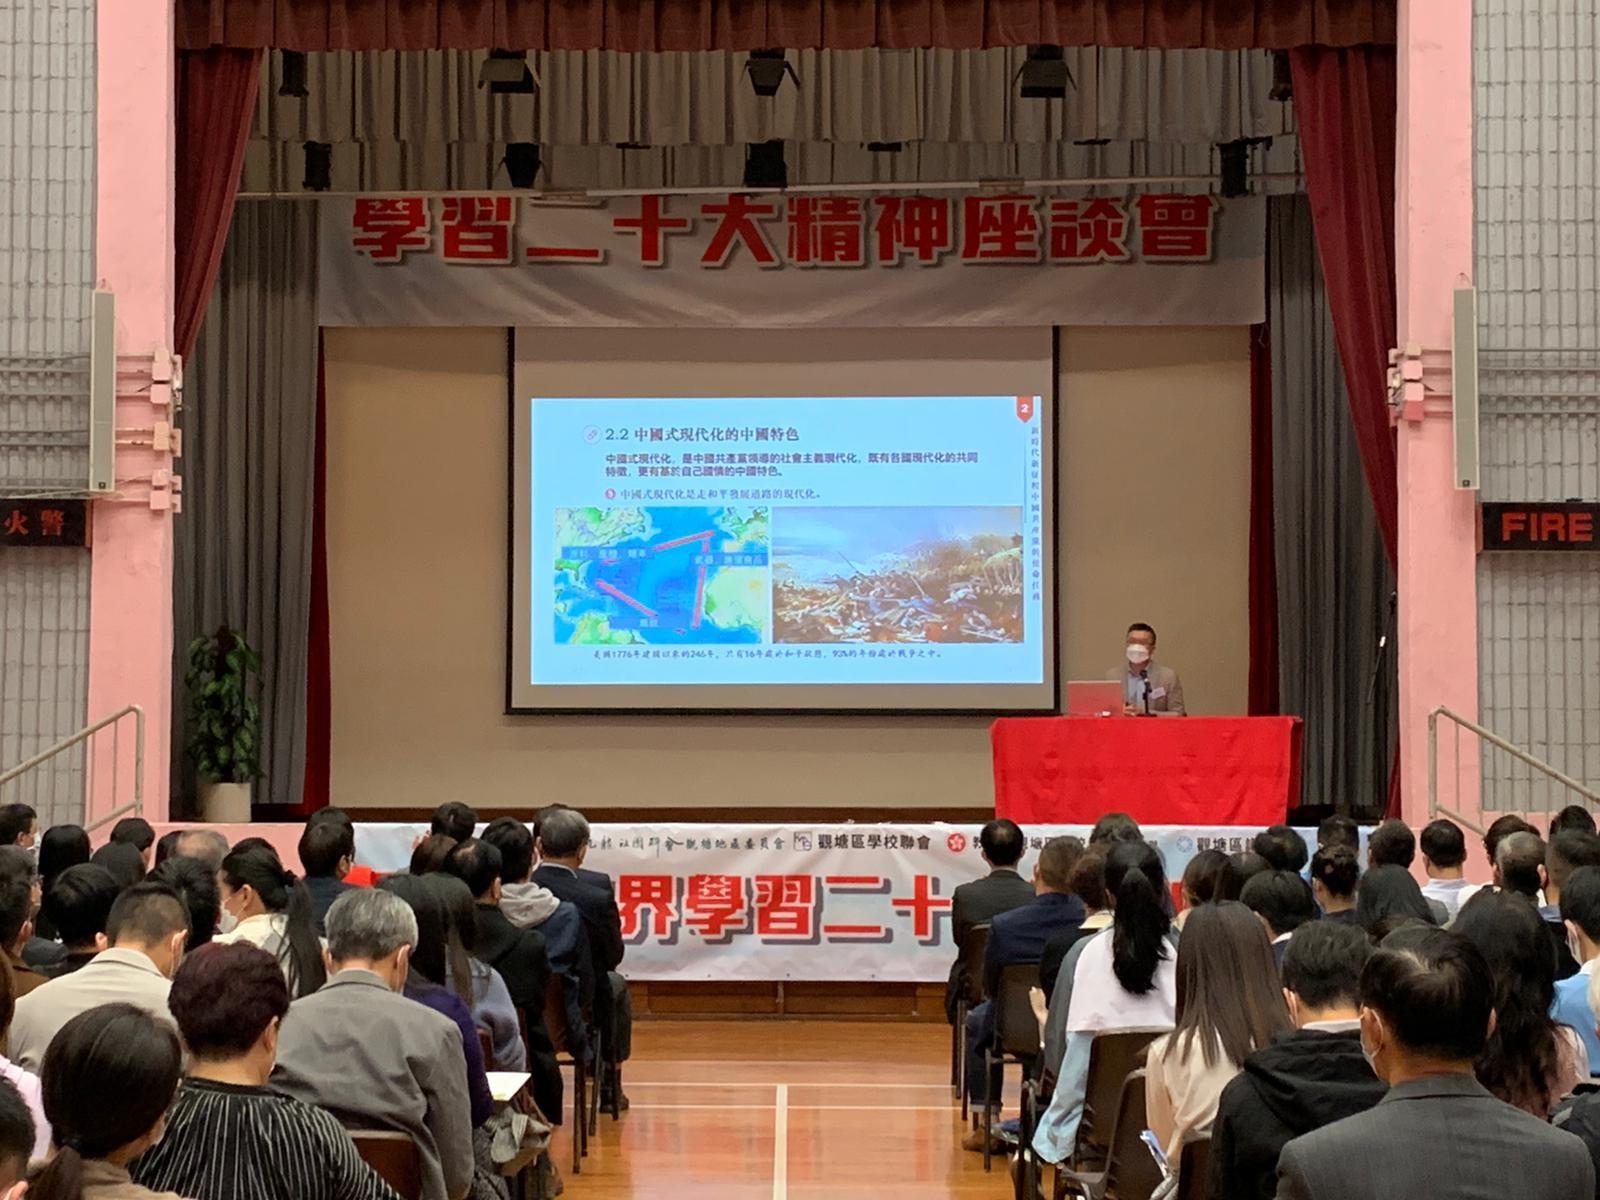 The Kwun Tong District Office, together with the Kowloon Federation of Associations Kwun Tong District Committee, the Kwun Tong District School Development Section of the Education Bureau and the Kwun Tong Schools Liaison Committee, held a session on "Learning the Spirit of the 20th National Congress of the CPC by the Education Sector of Kwun Tong District" at Kai Yip Community Hall on December 7. Photo shows guests and participants at the session.